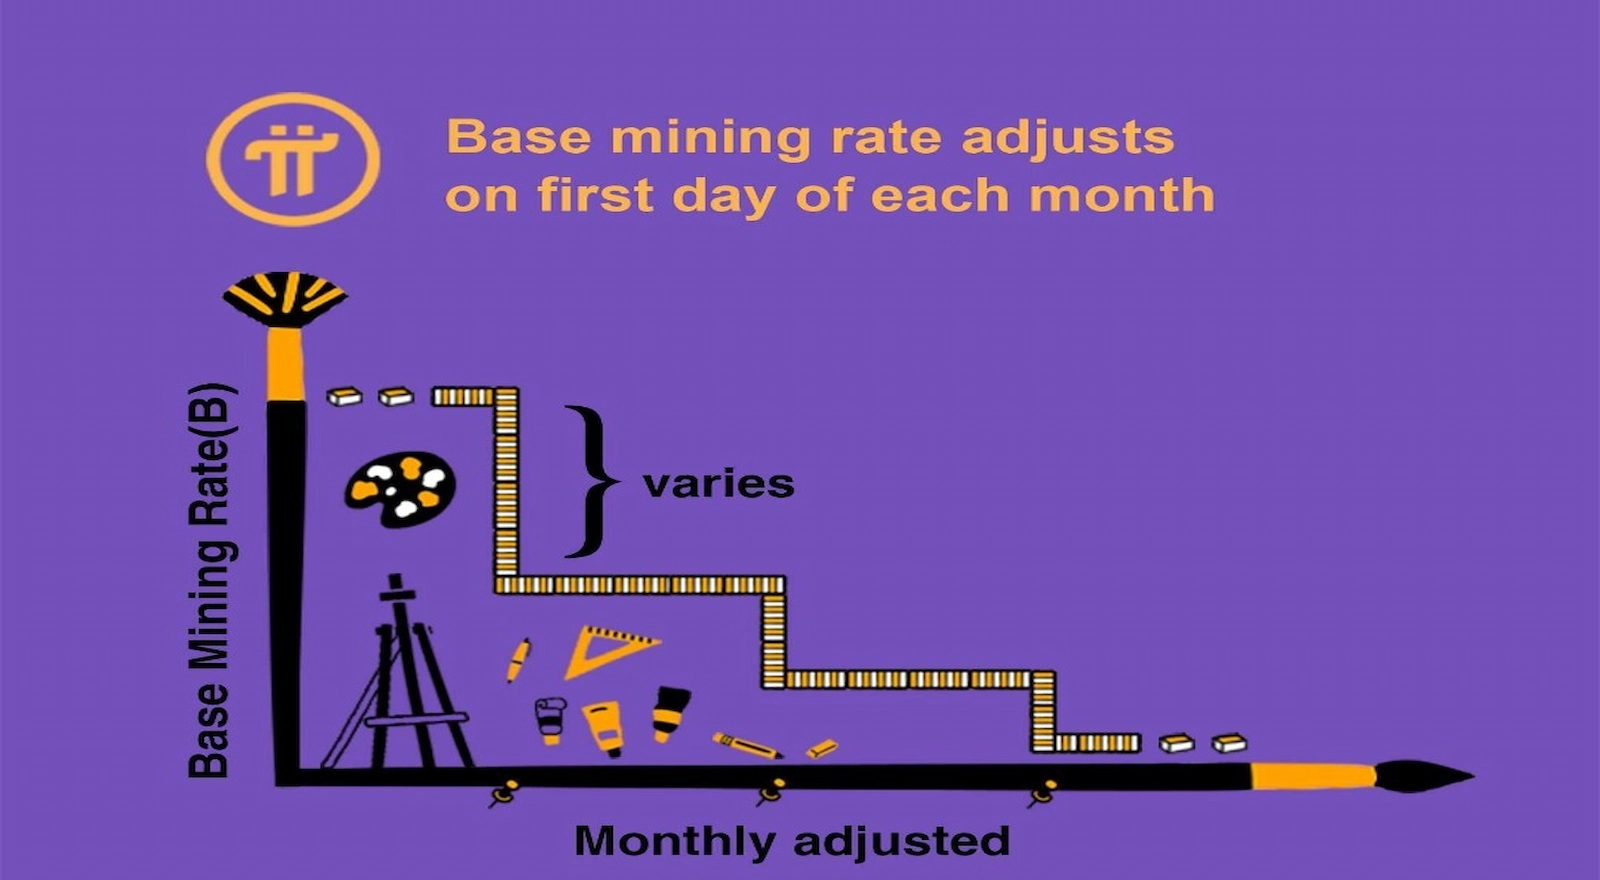 The Pi Network announced its monthly base mining rate adjustment